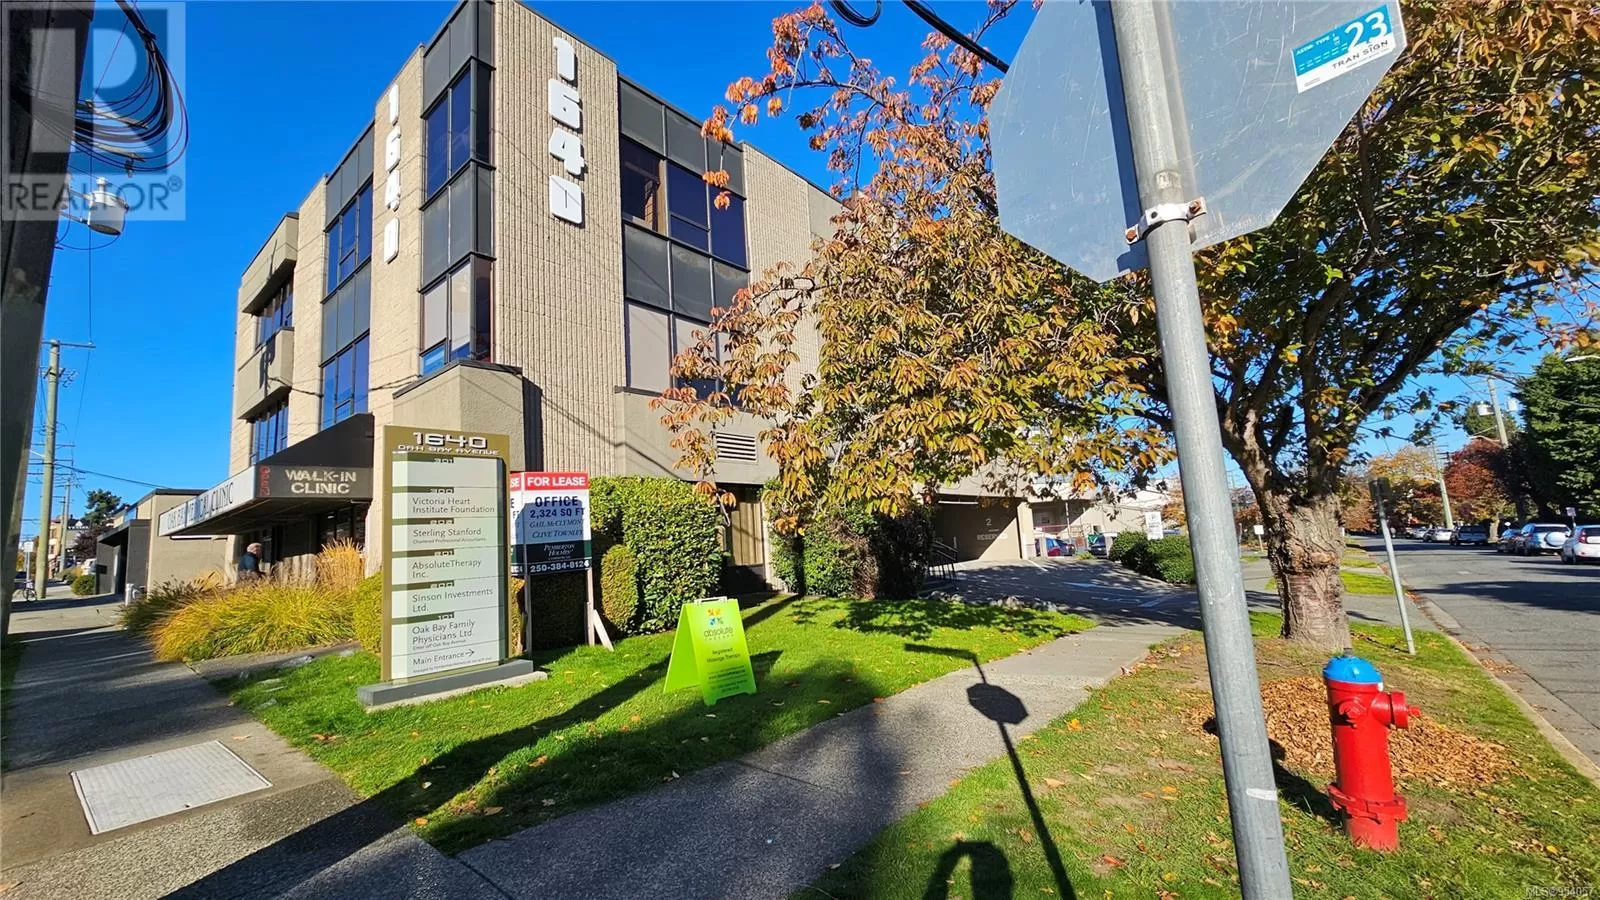 Offices for rent: 301 1640 Oak Bay Ave, Victoria, British Columbia V8R 1B2